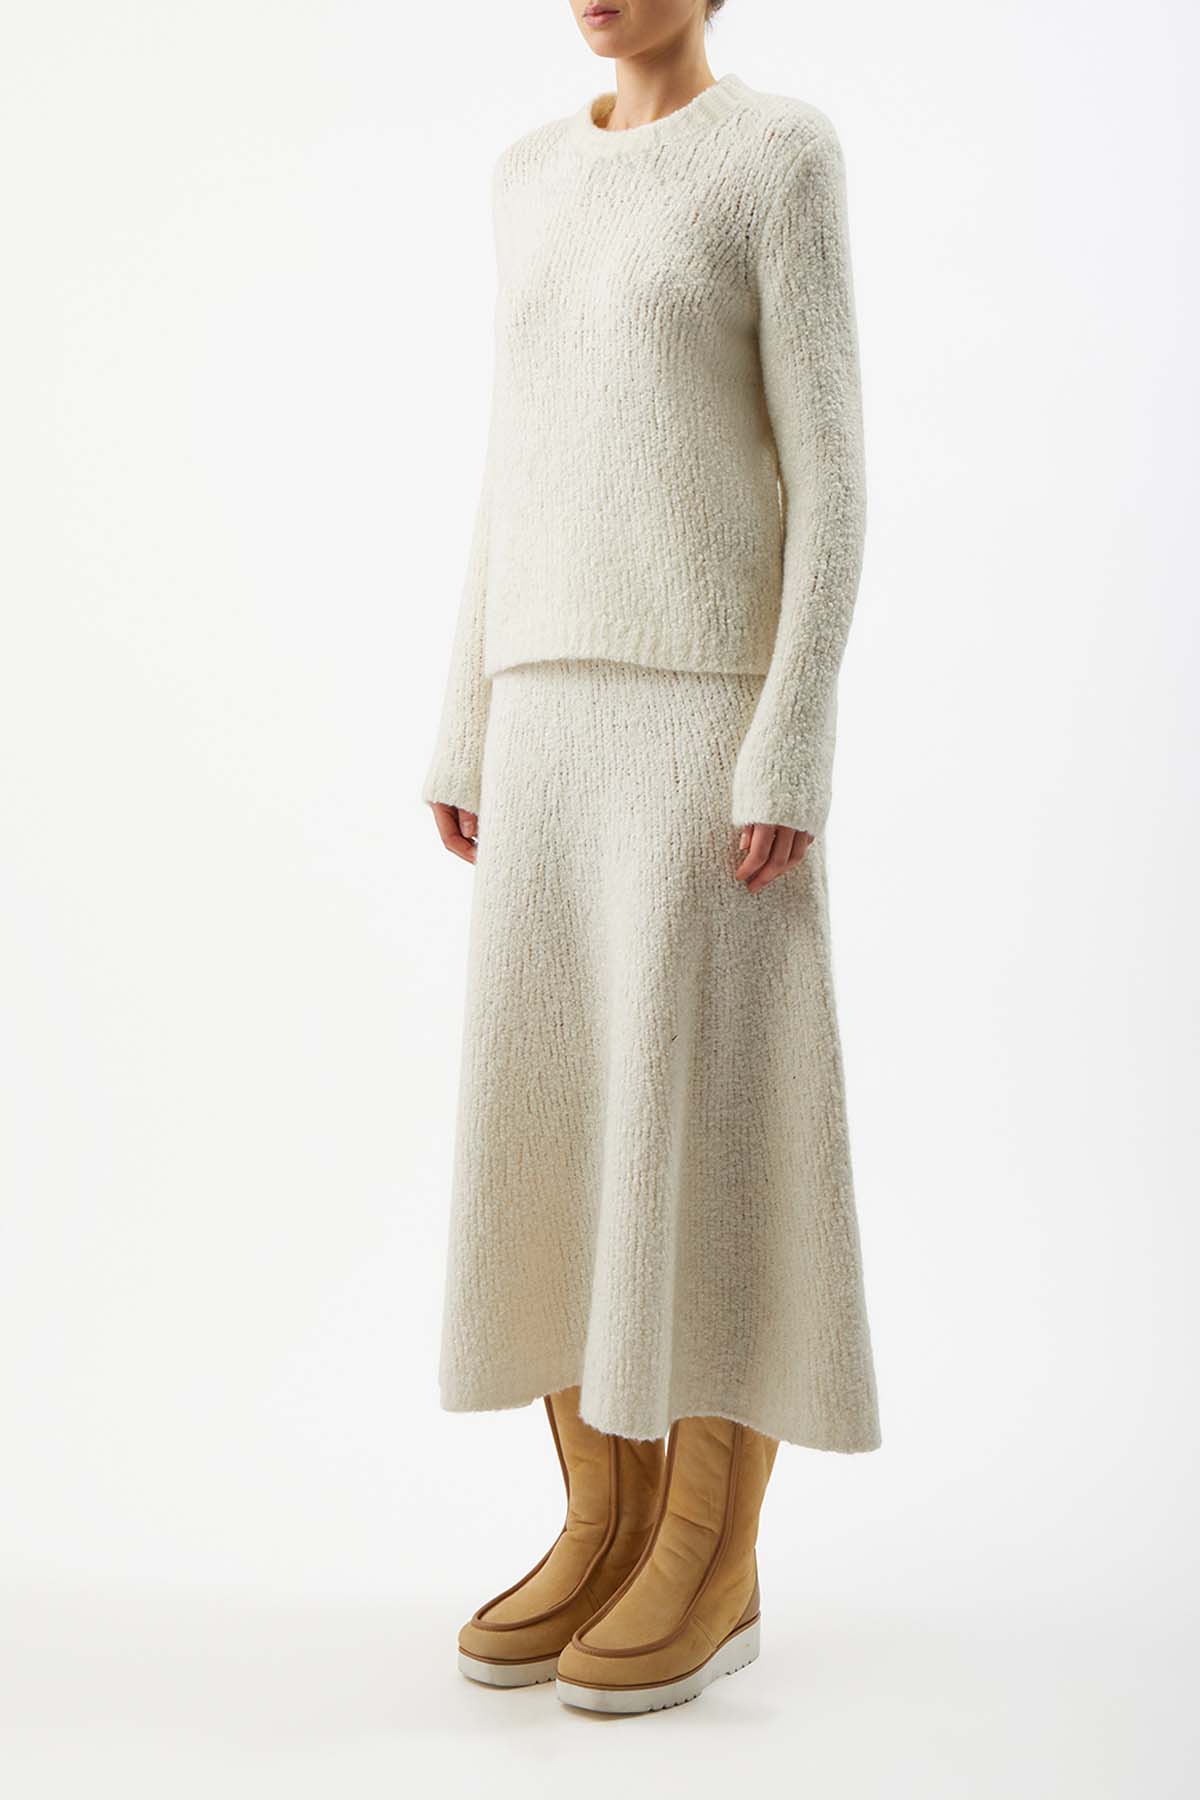 Pablo Skirt in Ivory Cashmere Boucle